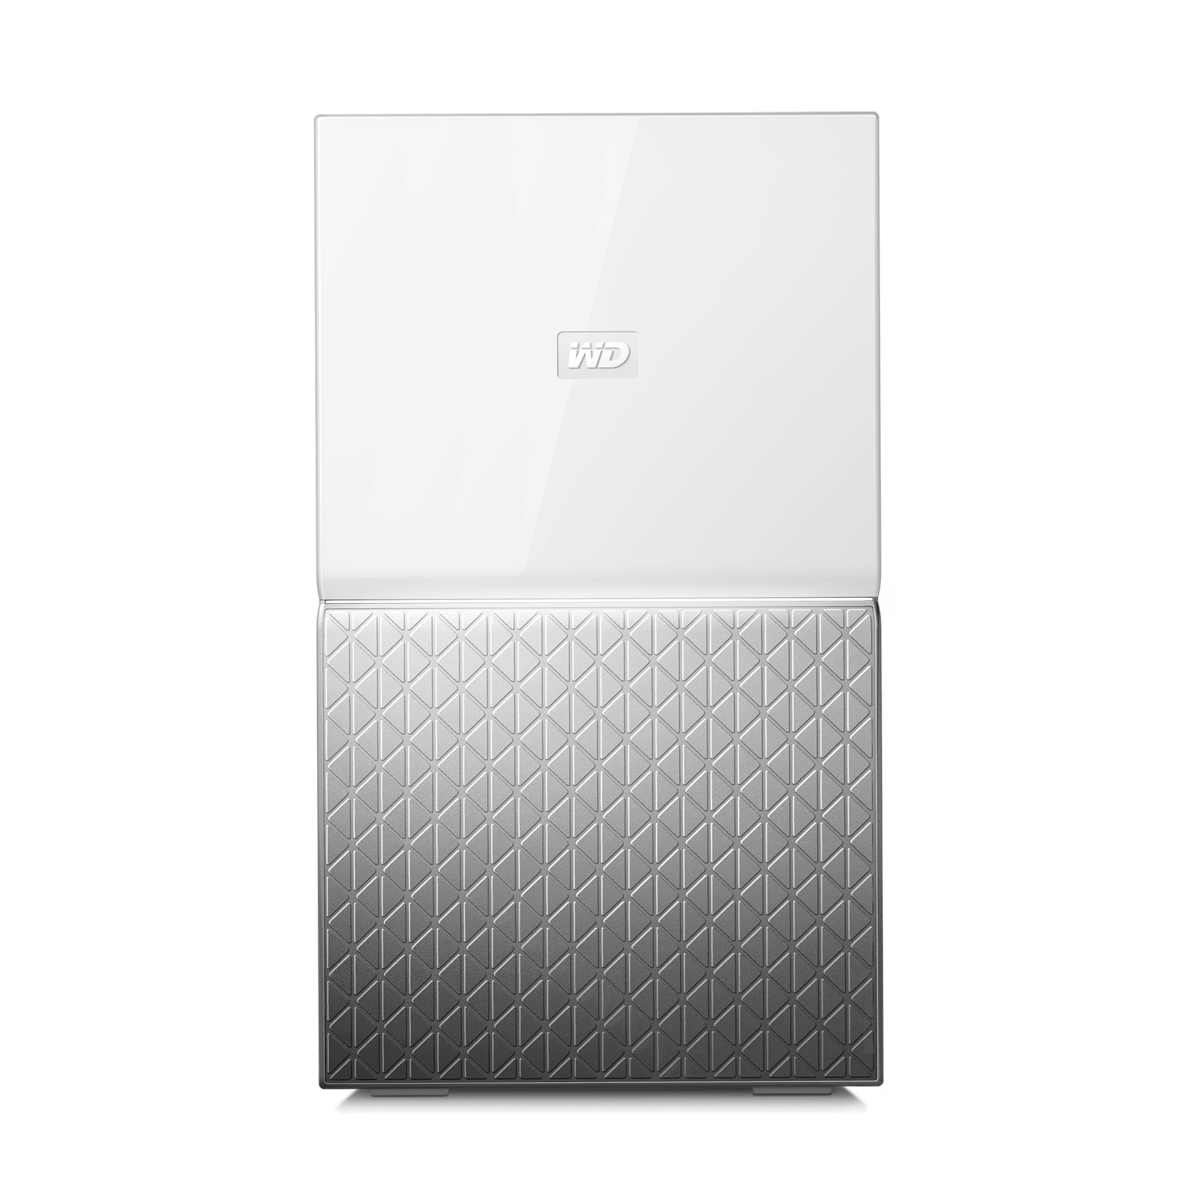 WD My Cloud Home Duo WDBMUT0120JWT - personal cloud storage device